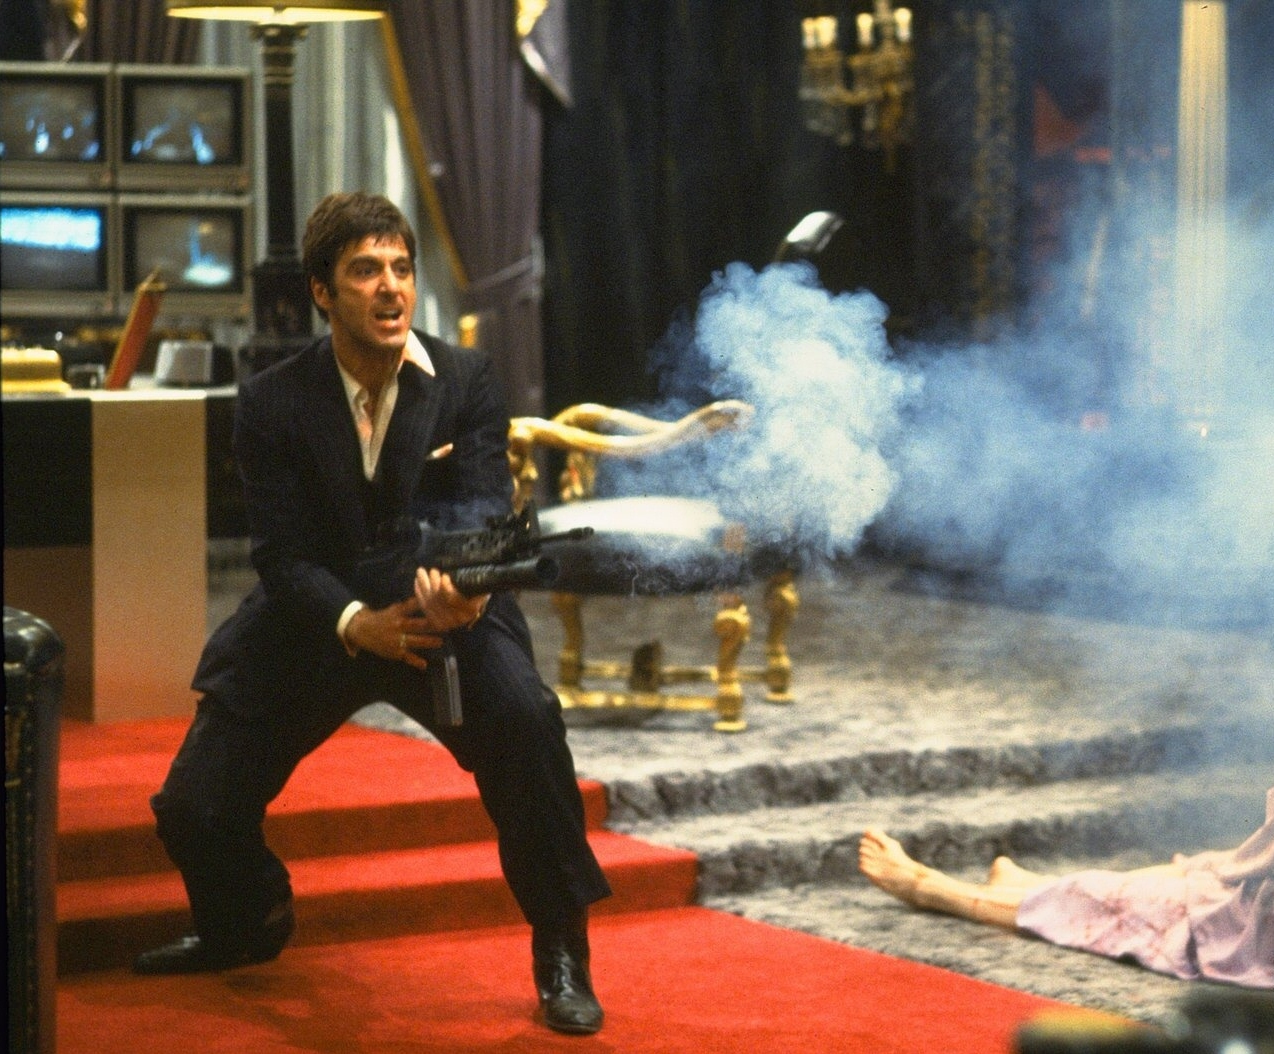 Scarface, Tony Montana dies in a epic gun battle in his  mansion  "Say hello to my little friend!"...